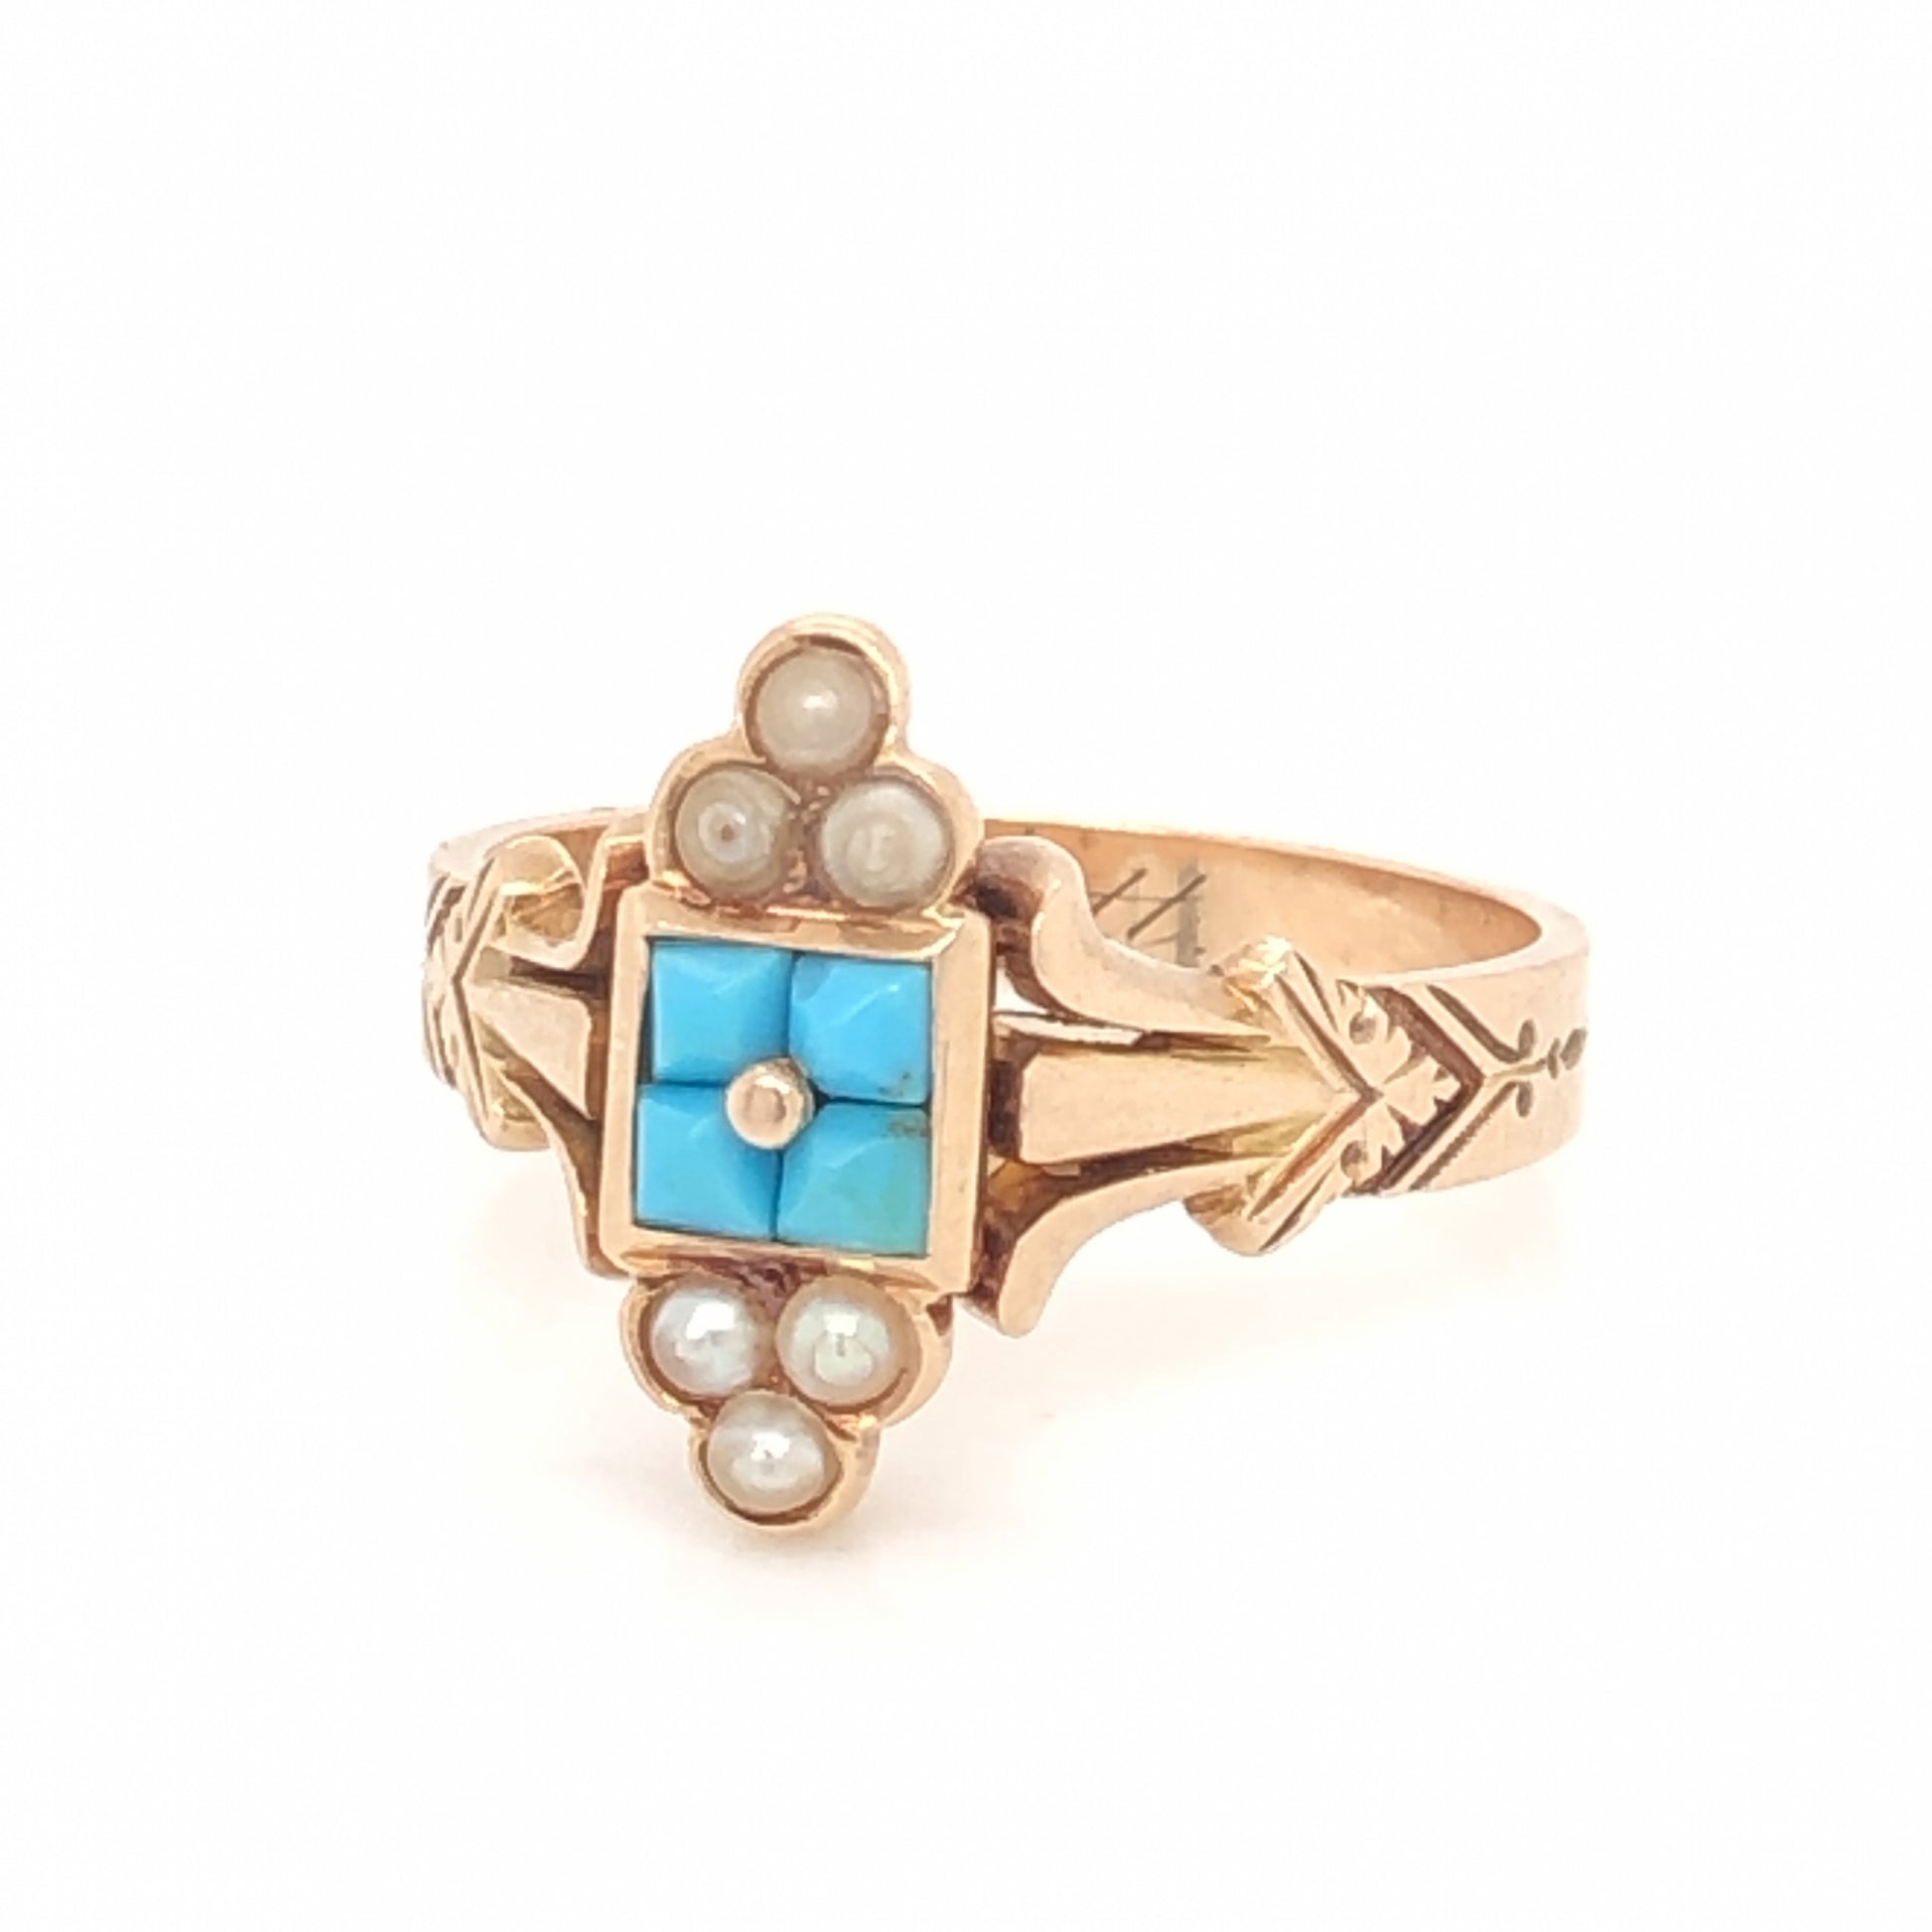 Victorian Pearl & Turquoise Ring in 14k Rose Gold